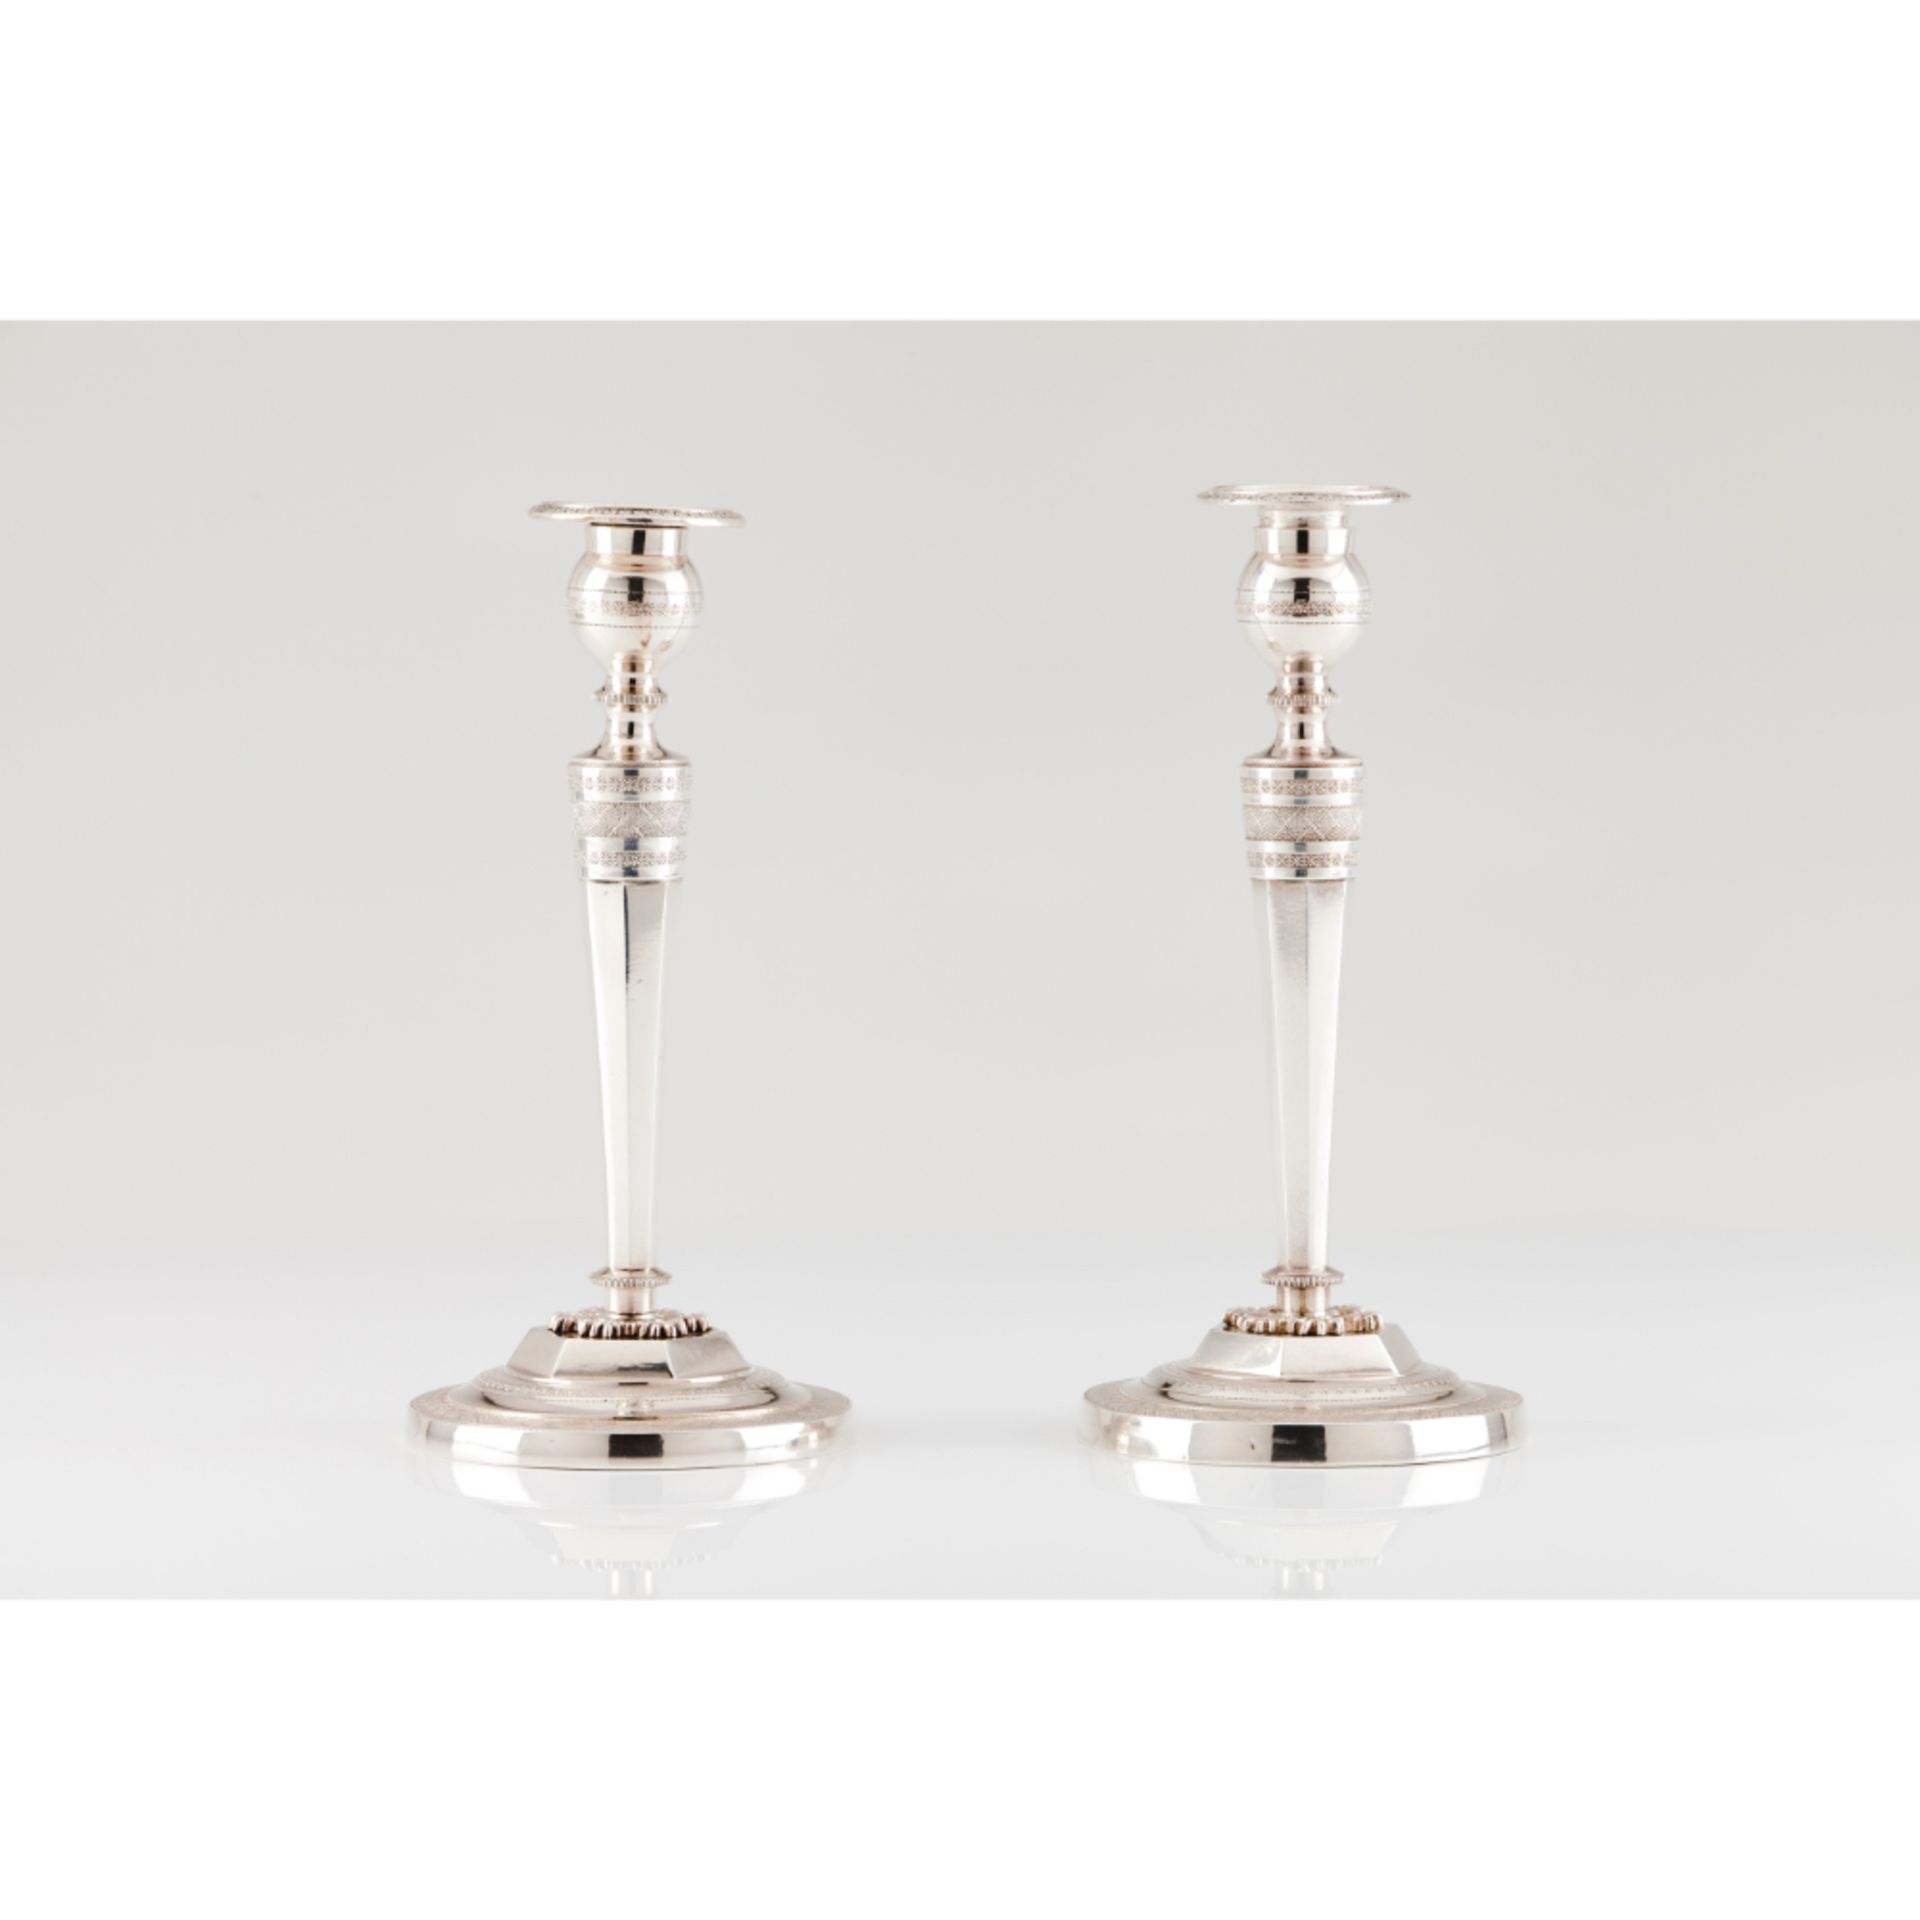 A pair of Consulate candlesticks